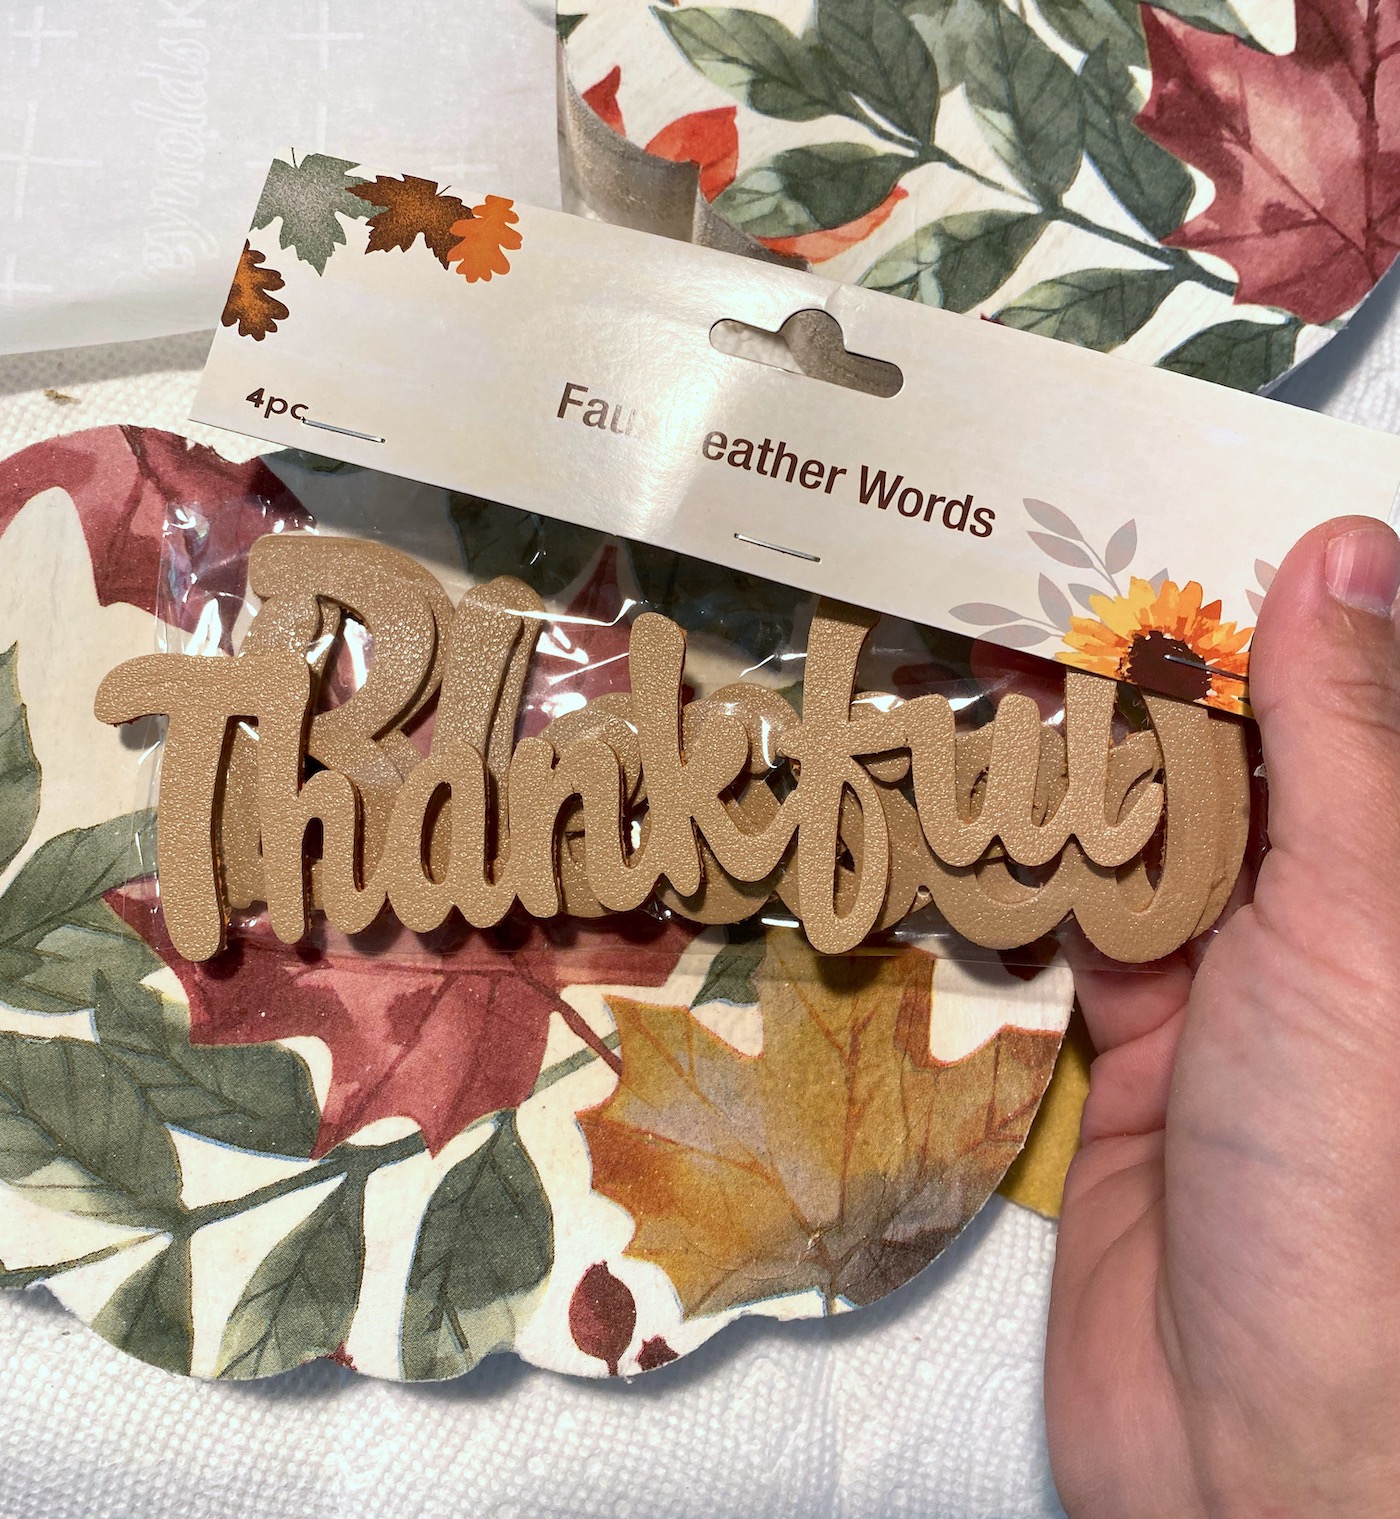 Package of Thanksgiving words from Dollar Tree